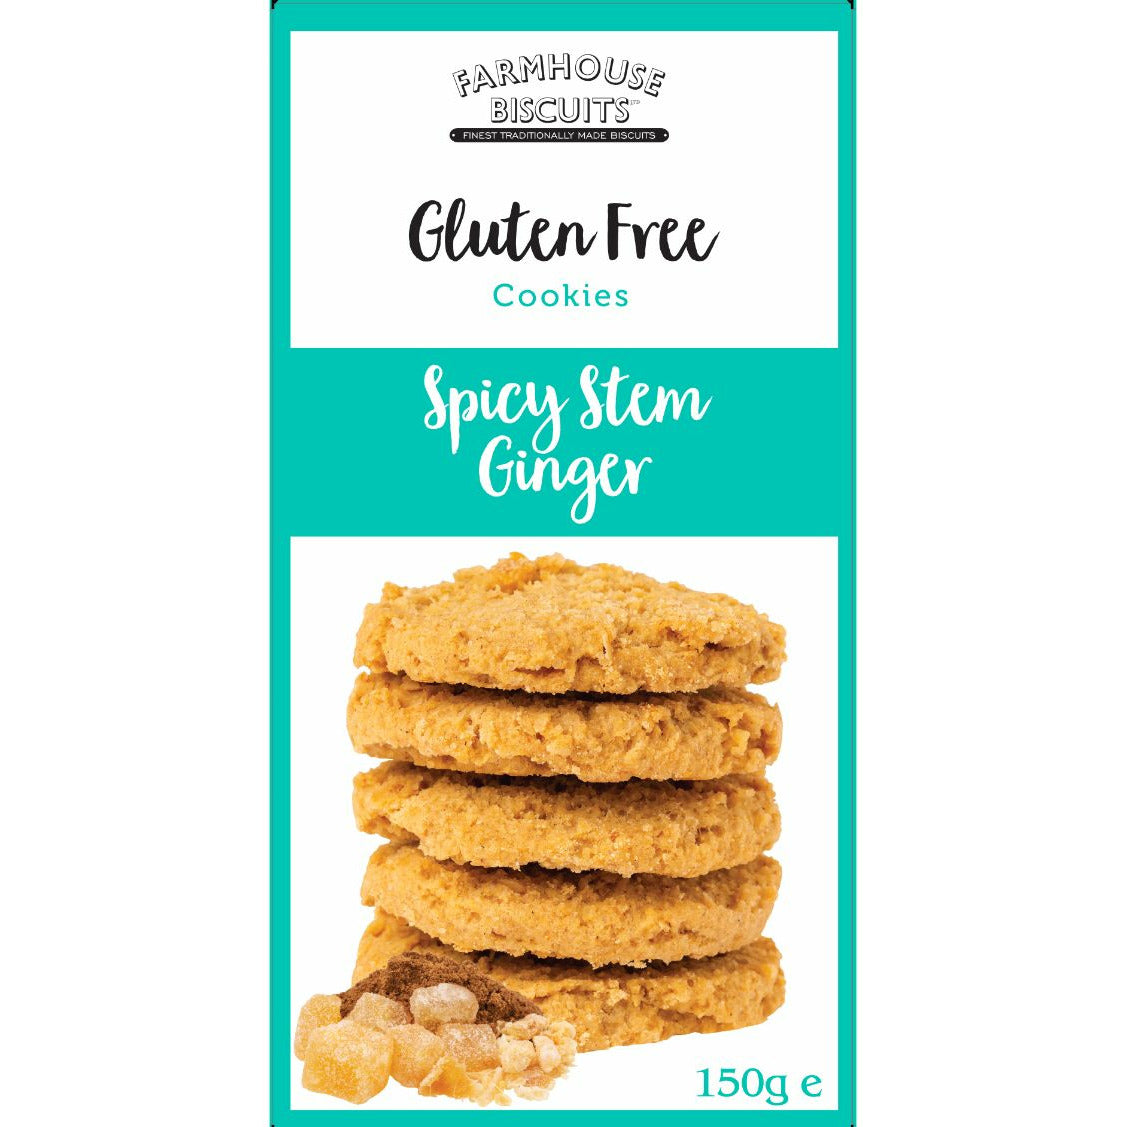 FARMHOUSEBISCUITS Gluten Free Spicy Stem Ginger Biscuits     Size - 12x150g